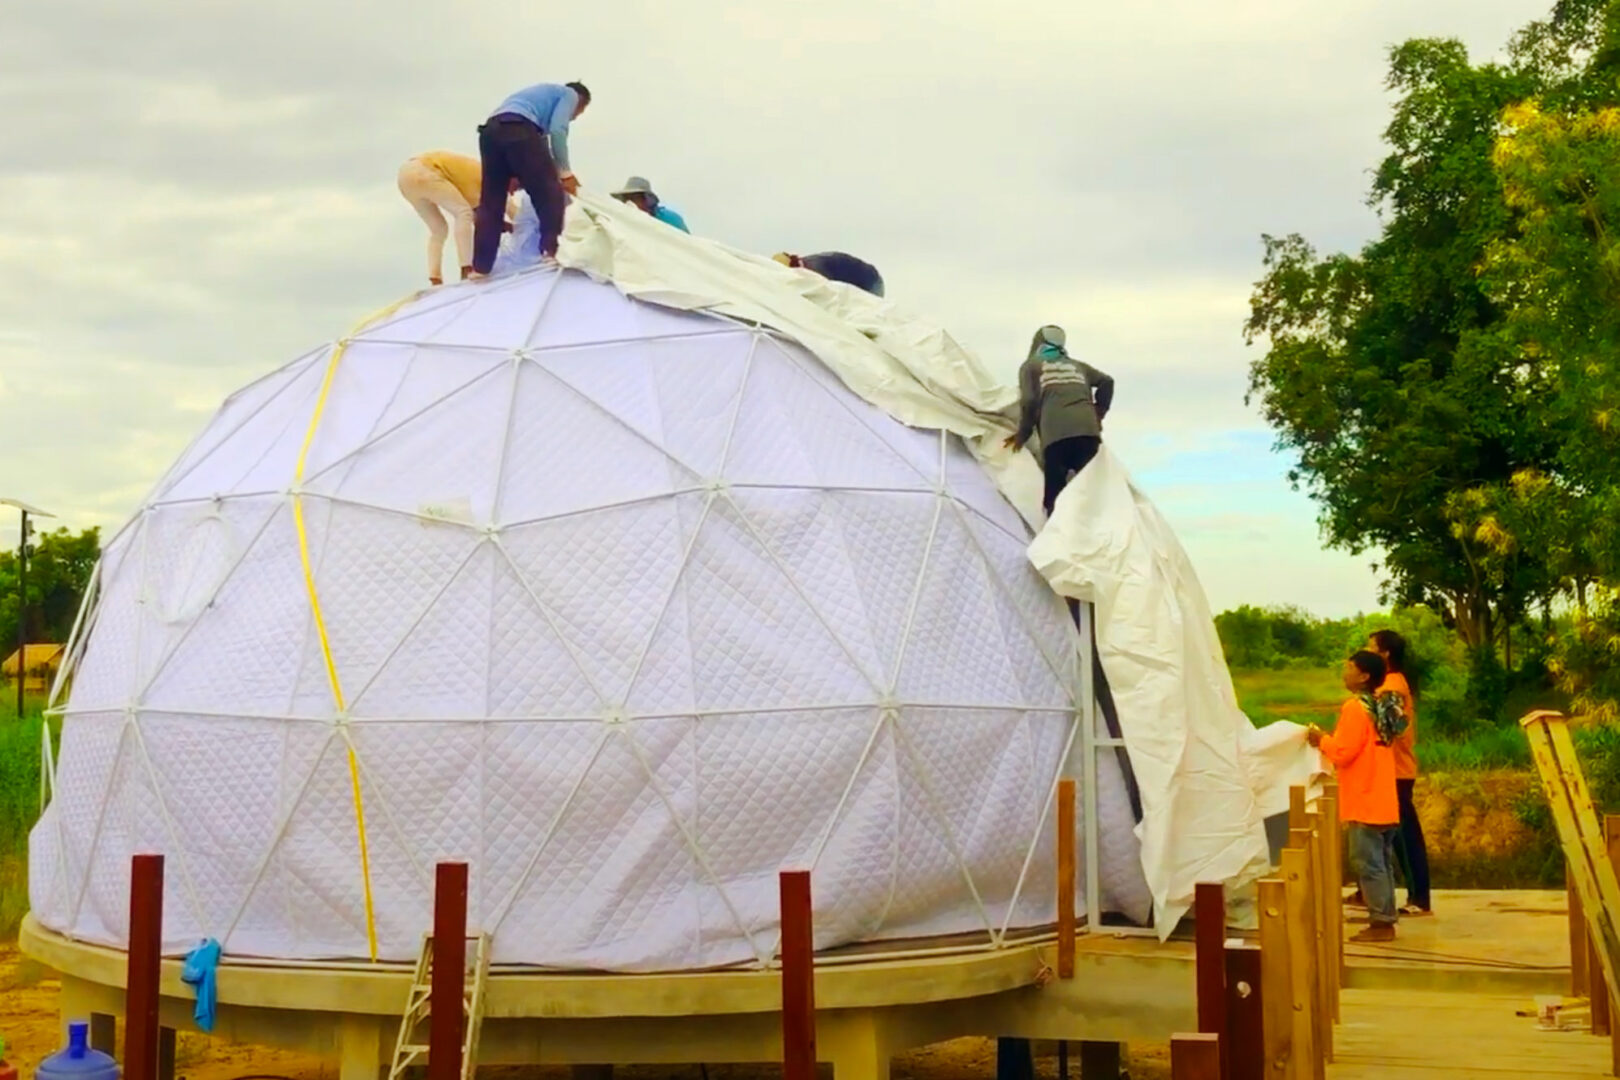 Building our Glamping Domes: Day 100 – Adding the Insulation & PVC Lining